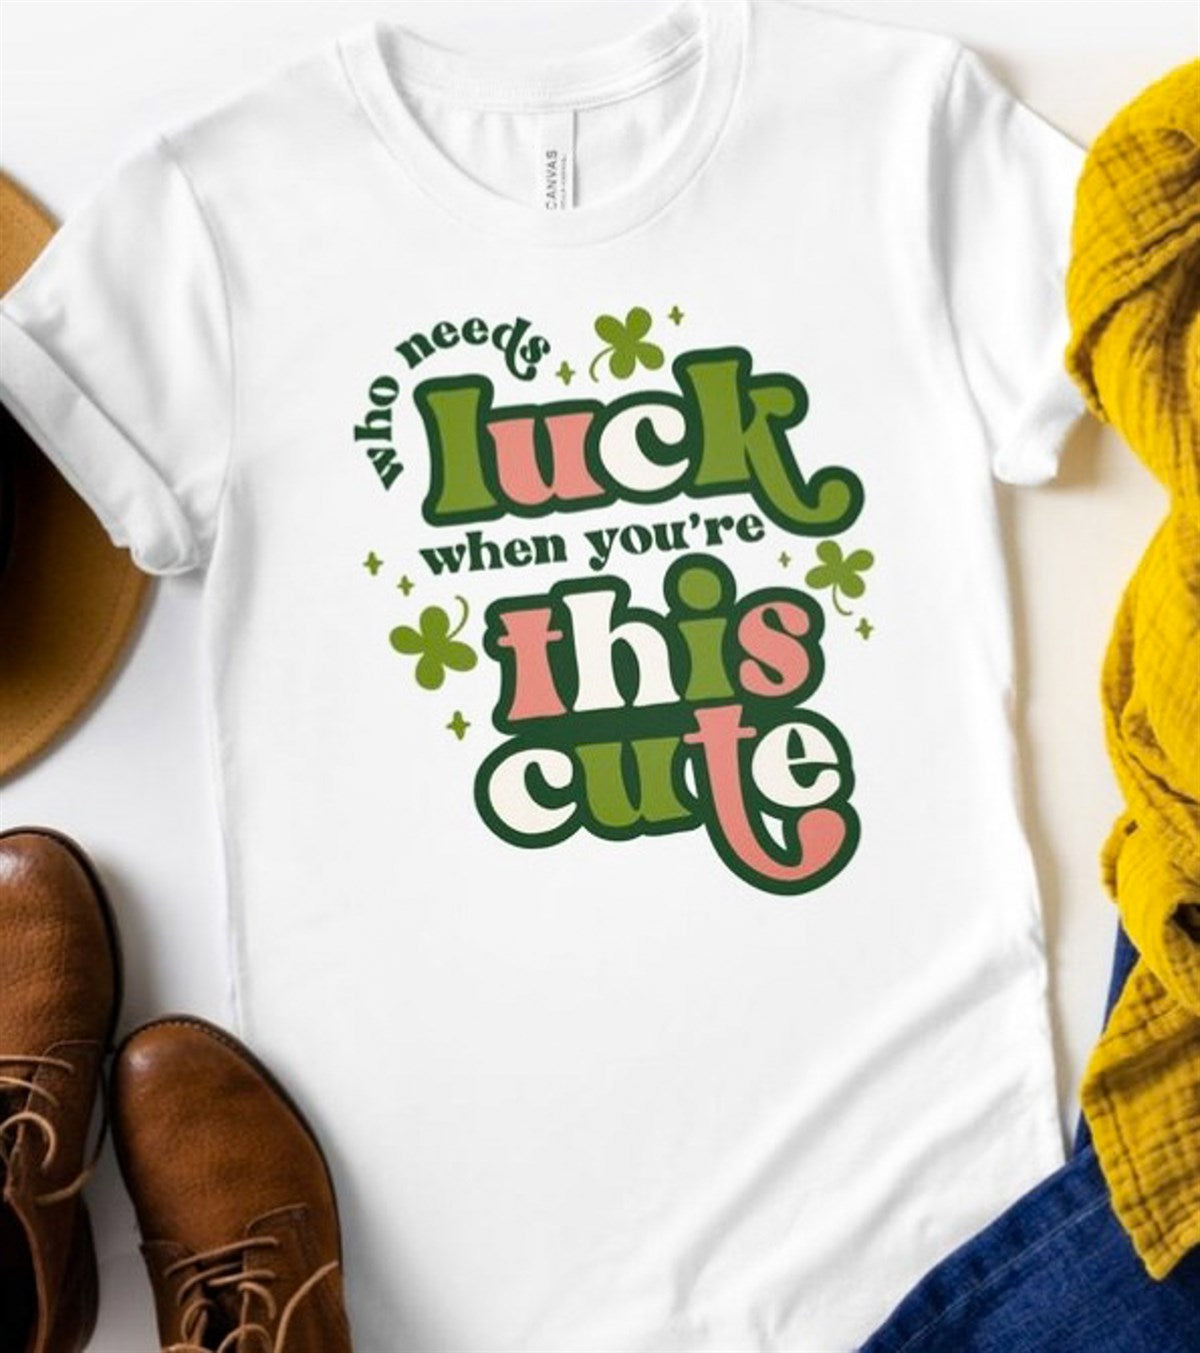 Who Needs Luck When You're This Cute Tee